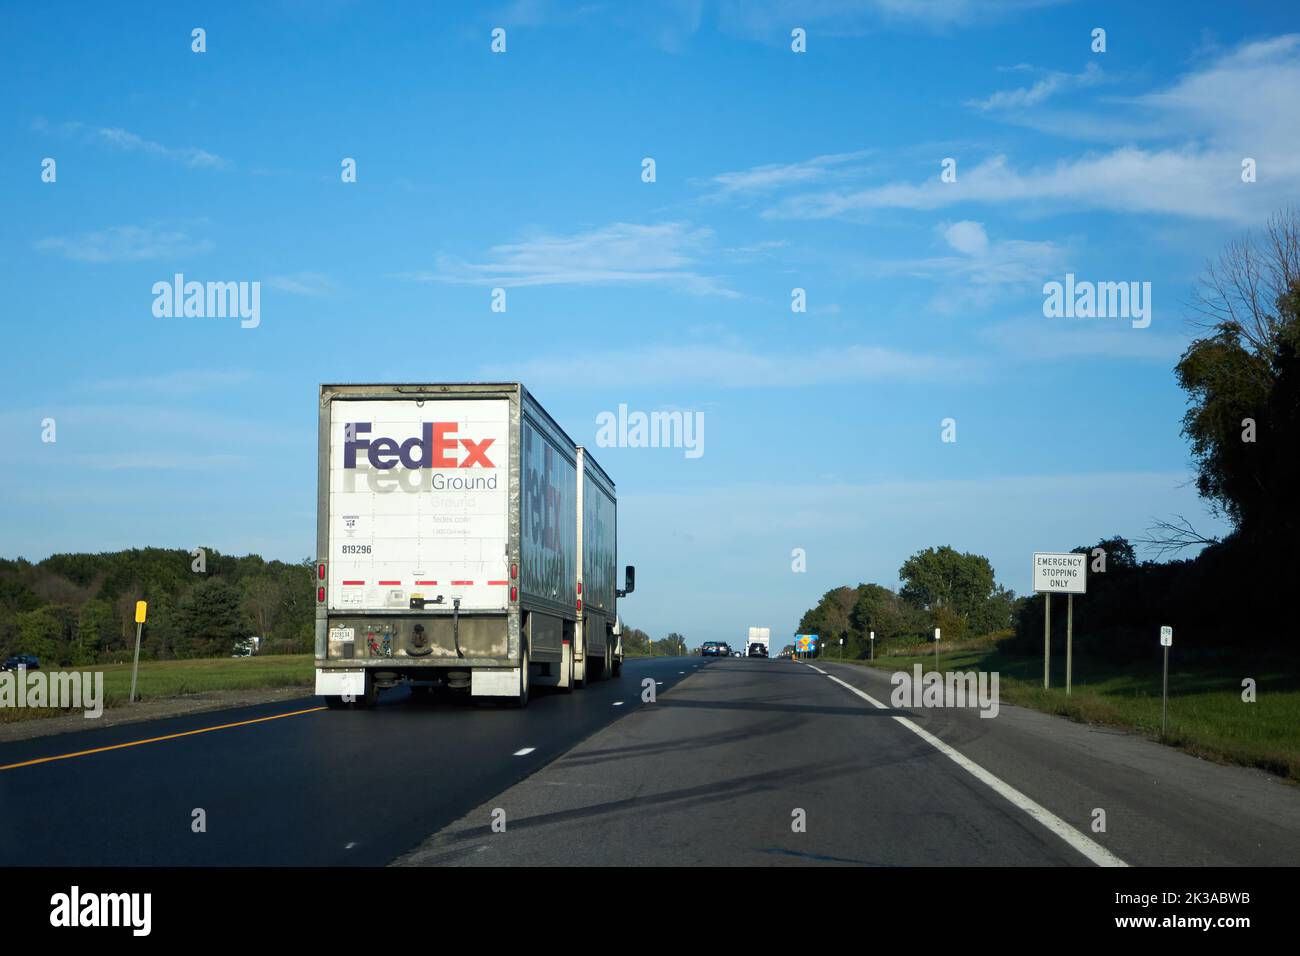 Genesee County, New York, USA - September 21, 2022: A FedEx Ground semi-trailer truck drives along the New York Thruway section of Interstate 90. Stock Photo